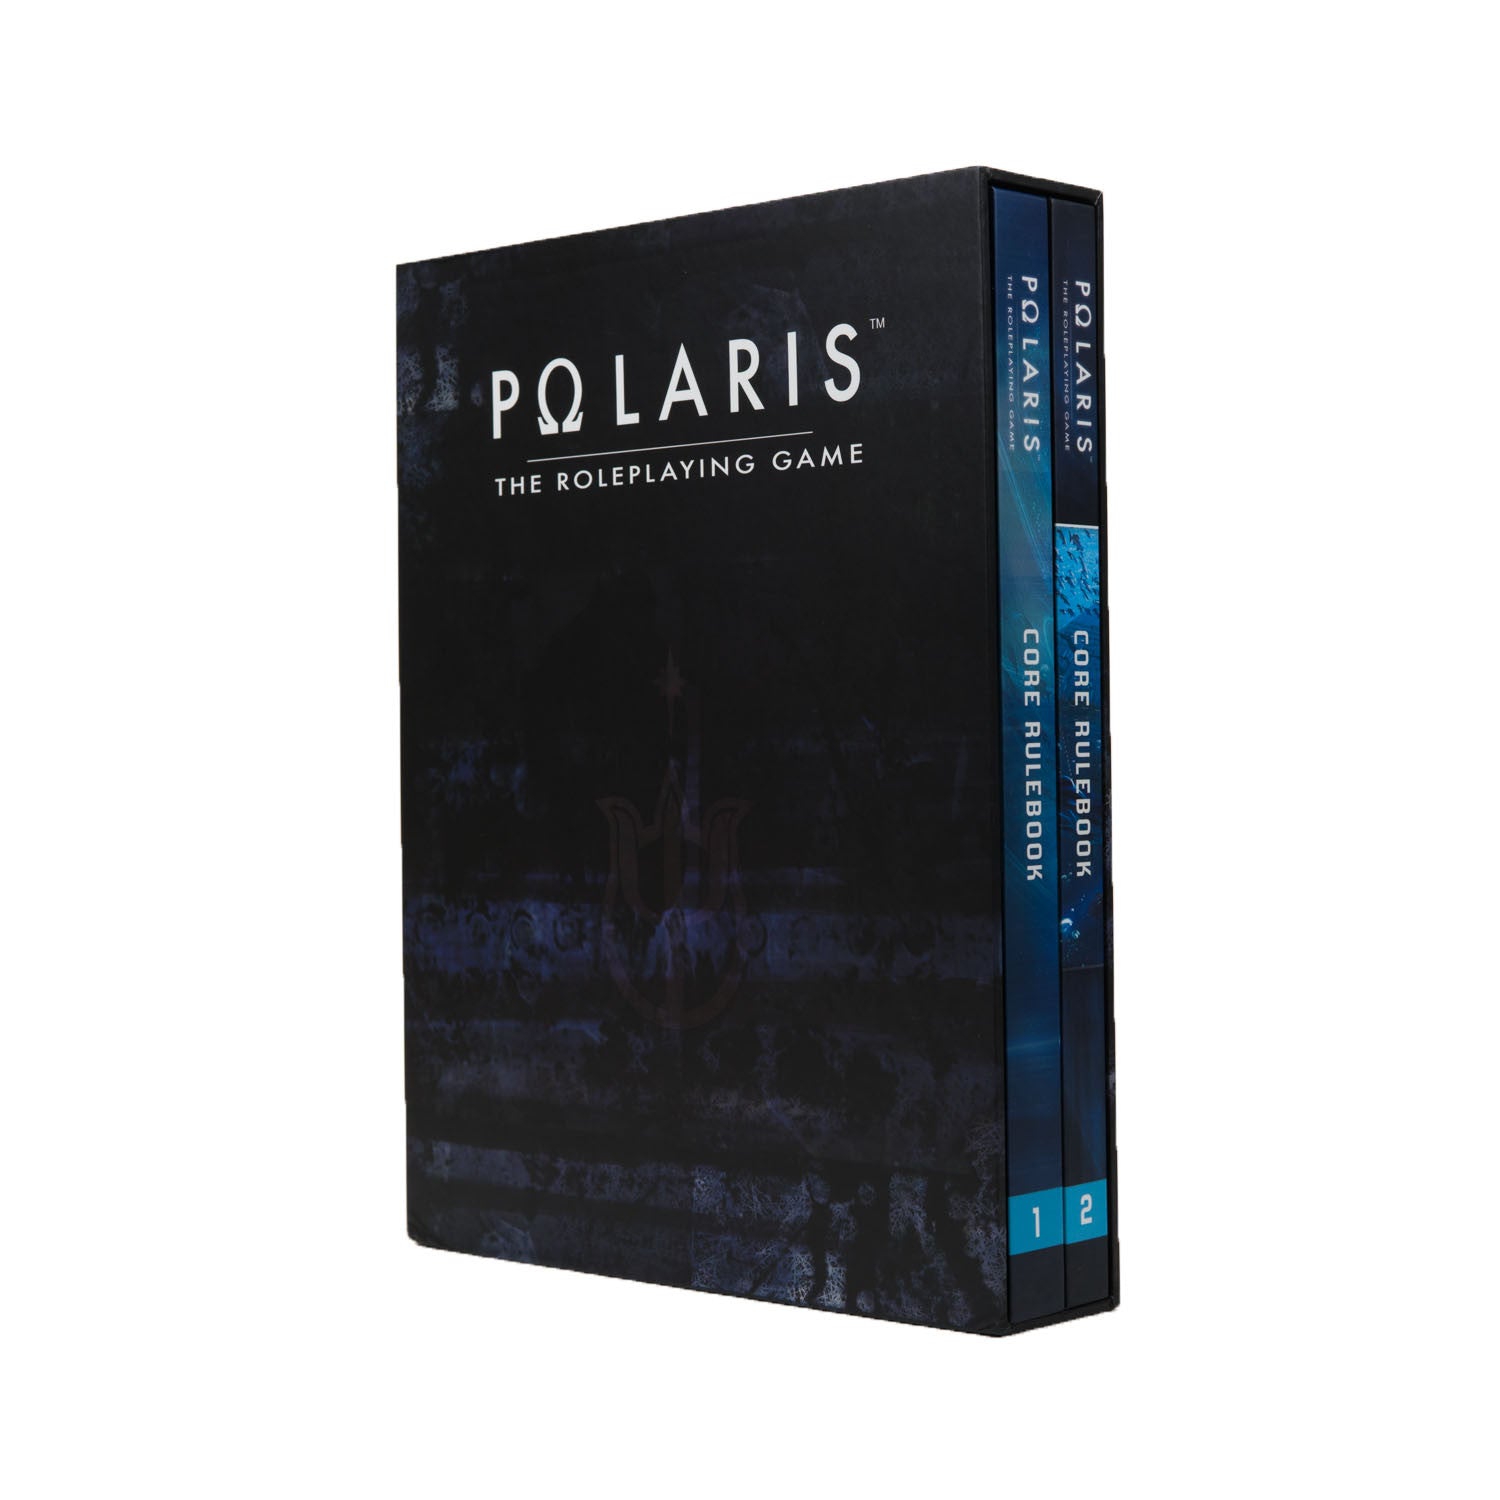 POLARIS The Roleplaying Game Core Rulebook Set (Hard Cover)